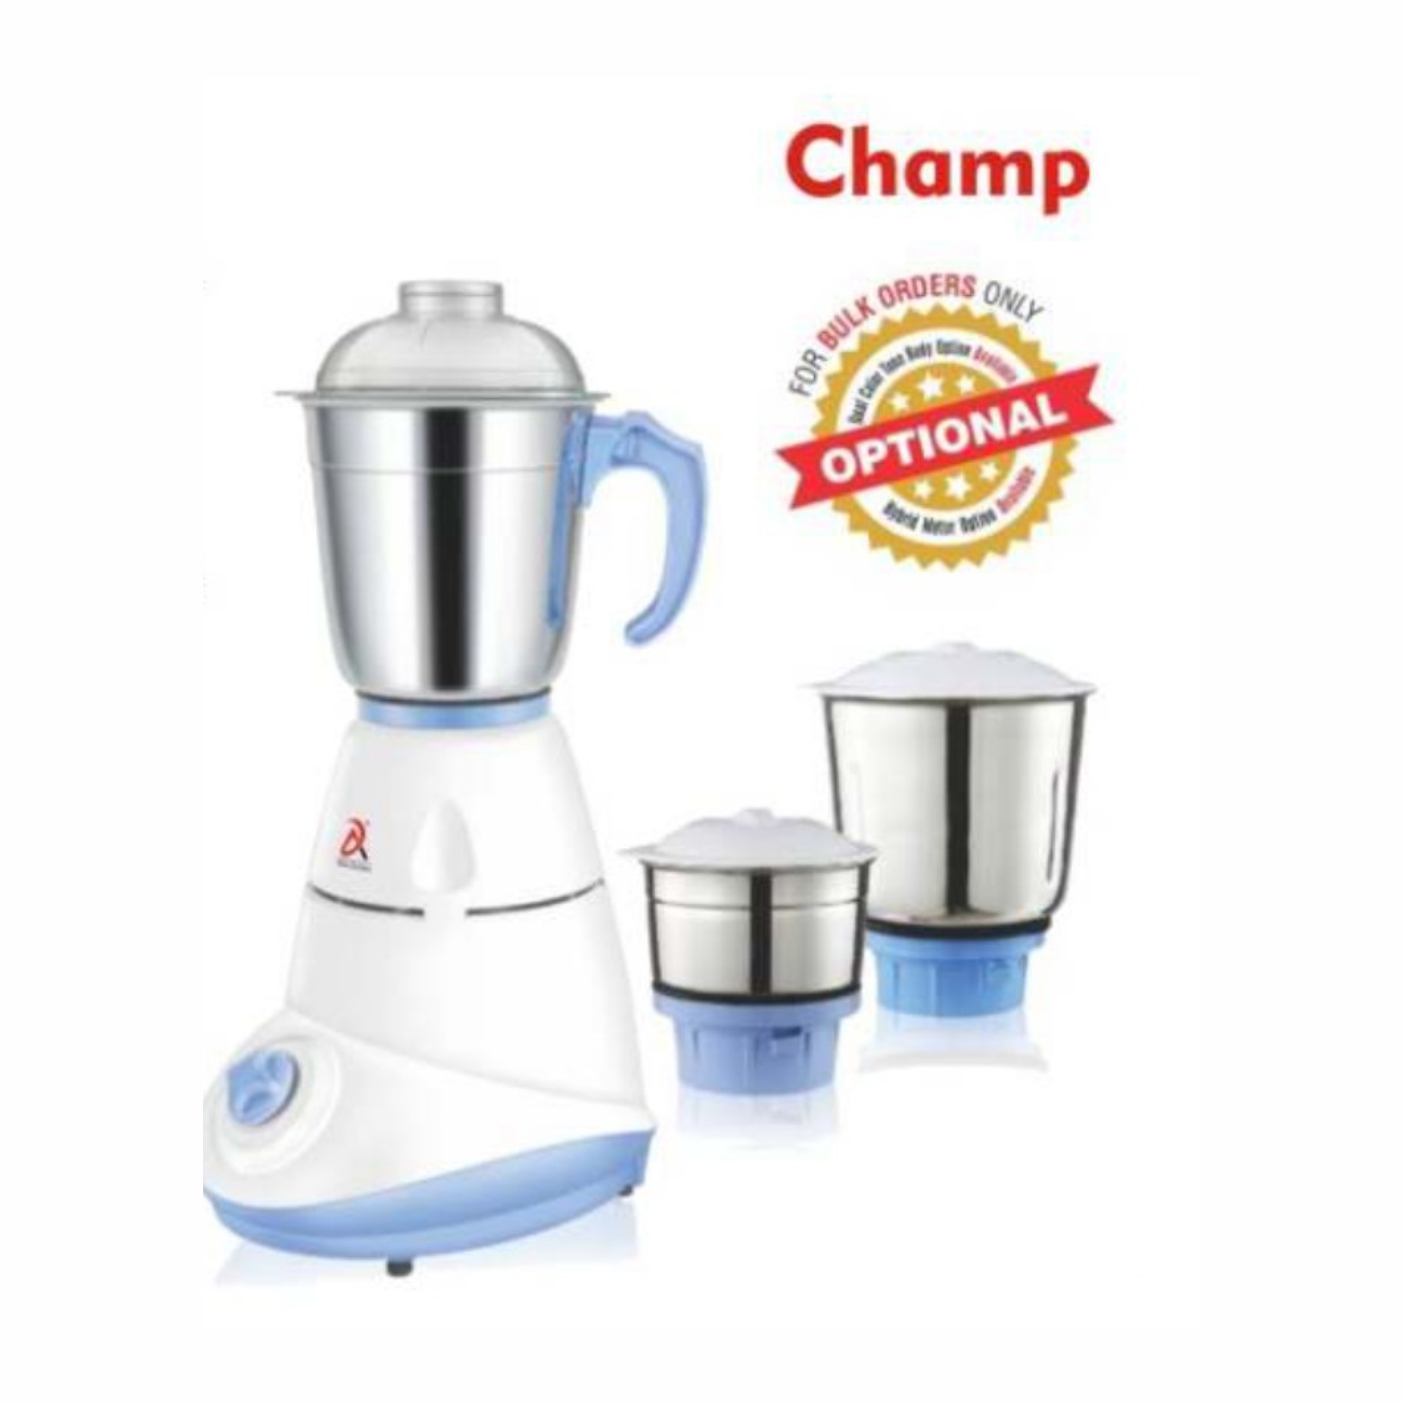 ECONOMICAL MINI Domestic Mixer Grinding Machine 3 Stainless Steel Jars with 500 Watts Motor Champ